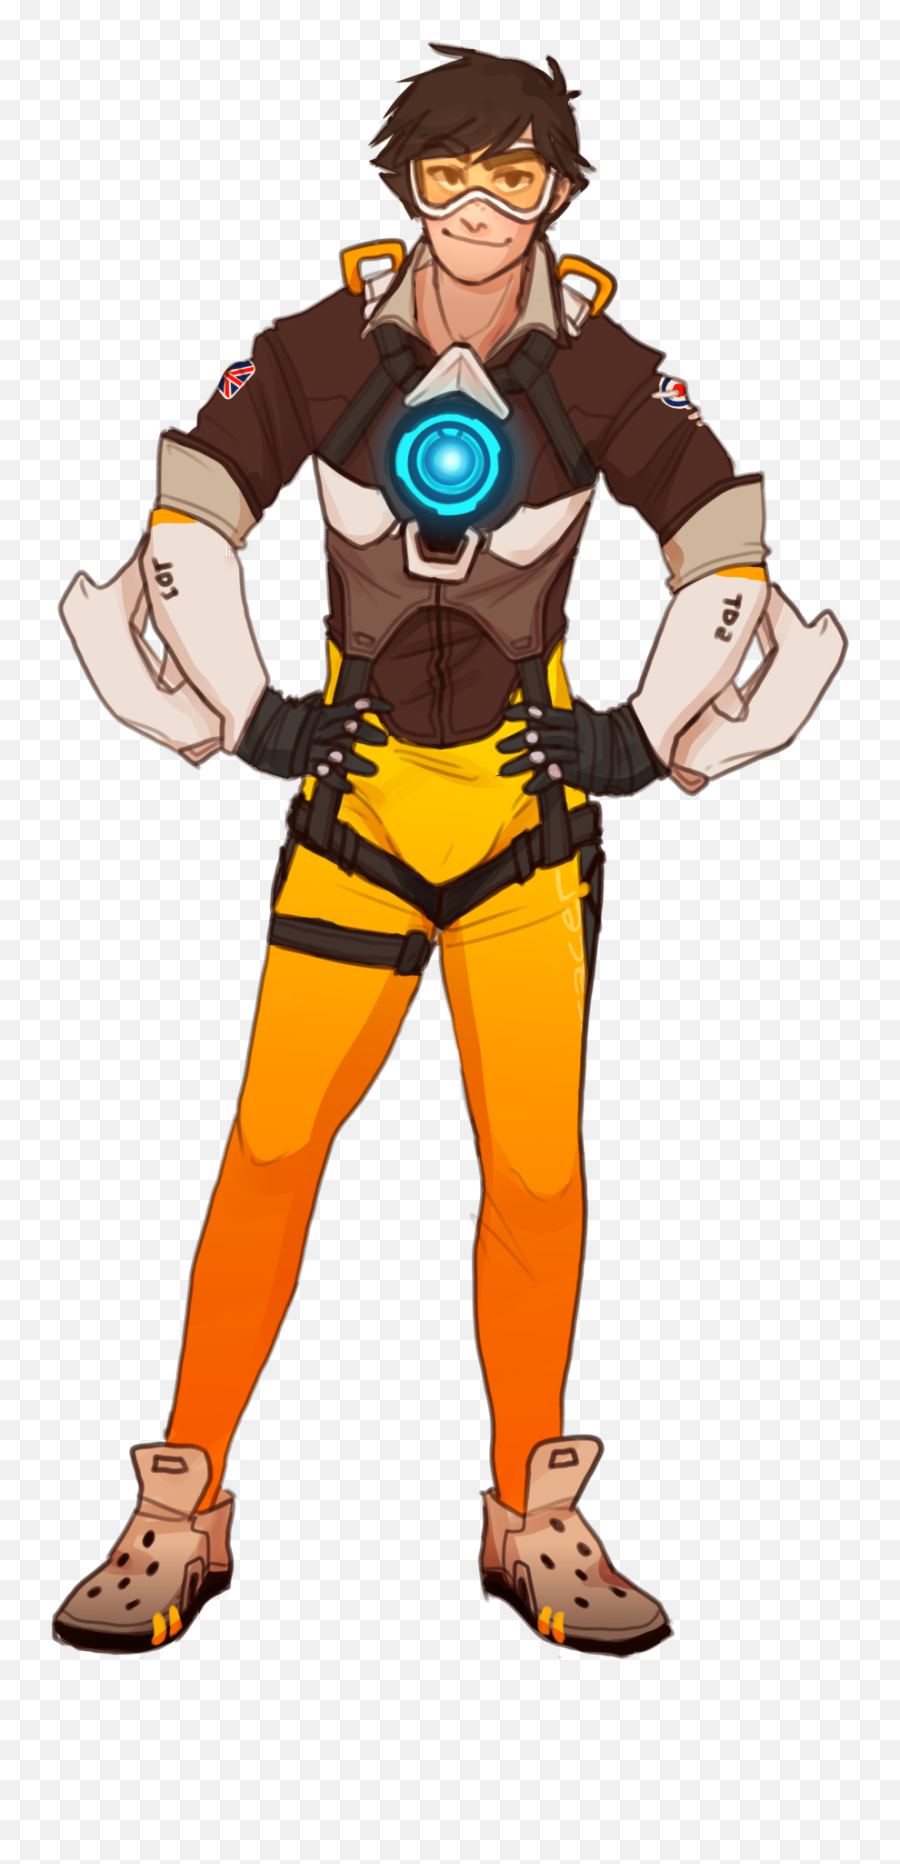 Overwatch Just A Sketch - Male Tracer Overwatch Png,Overwatch Tracer Png